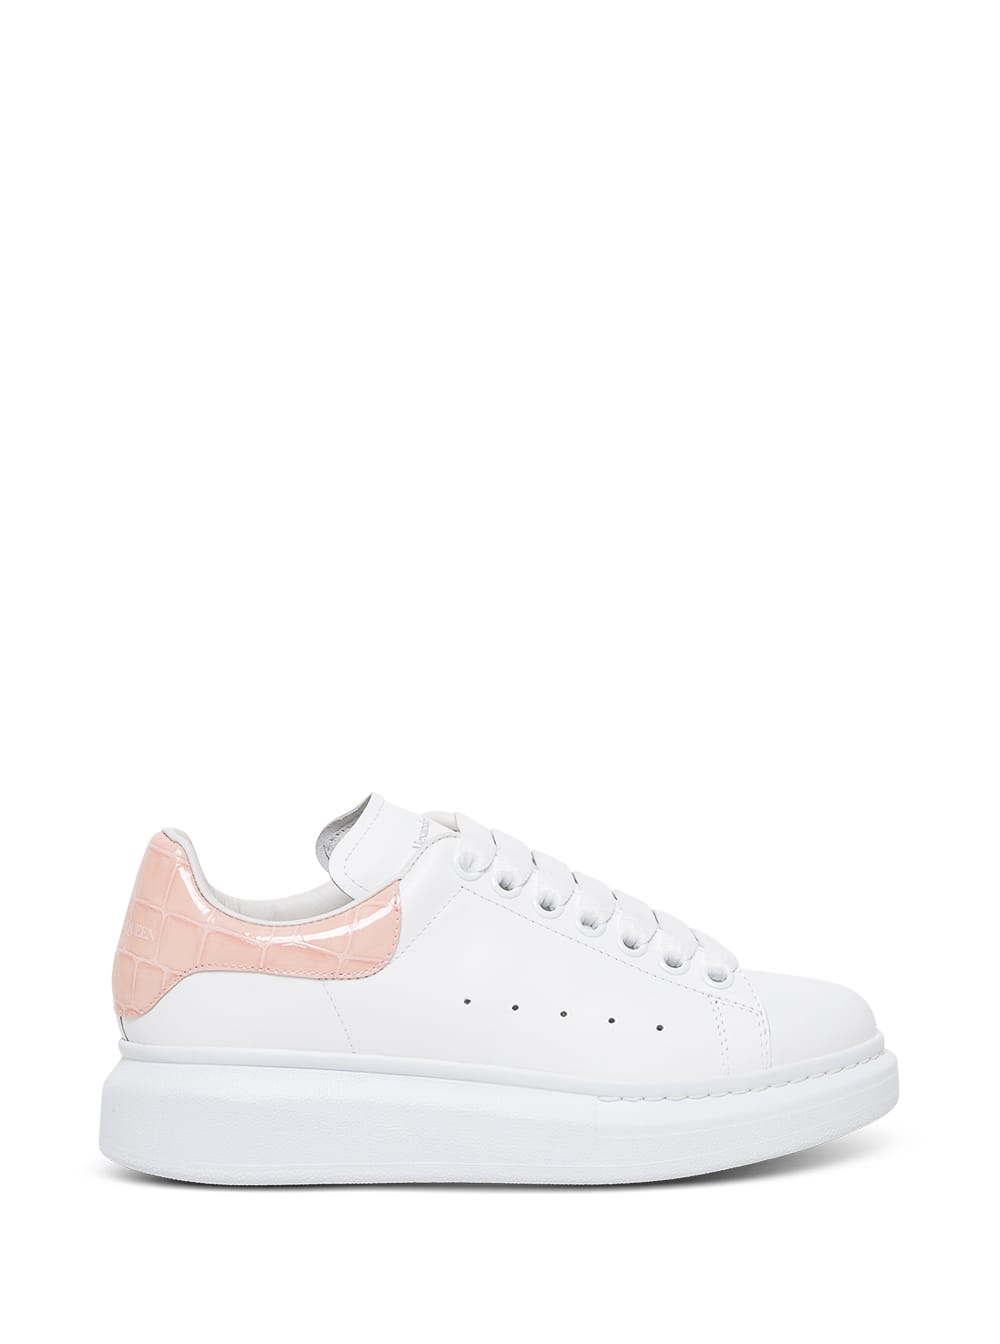 Alexander McQueen Oversize White Leather Sneakers With Crocodile Printed Heel Tab